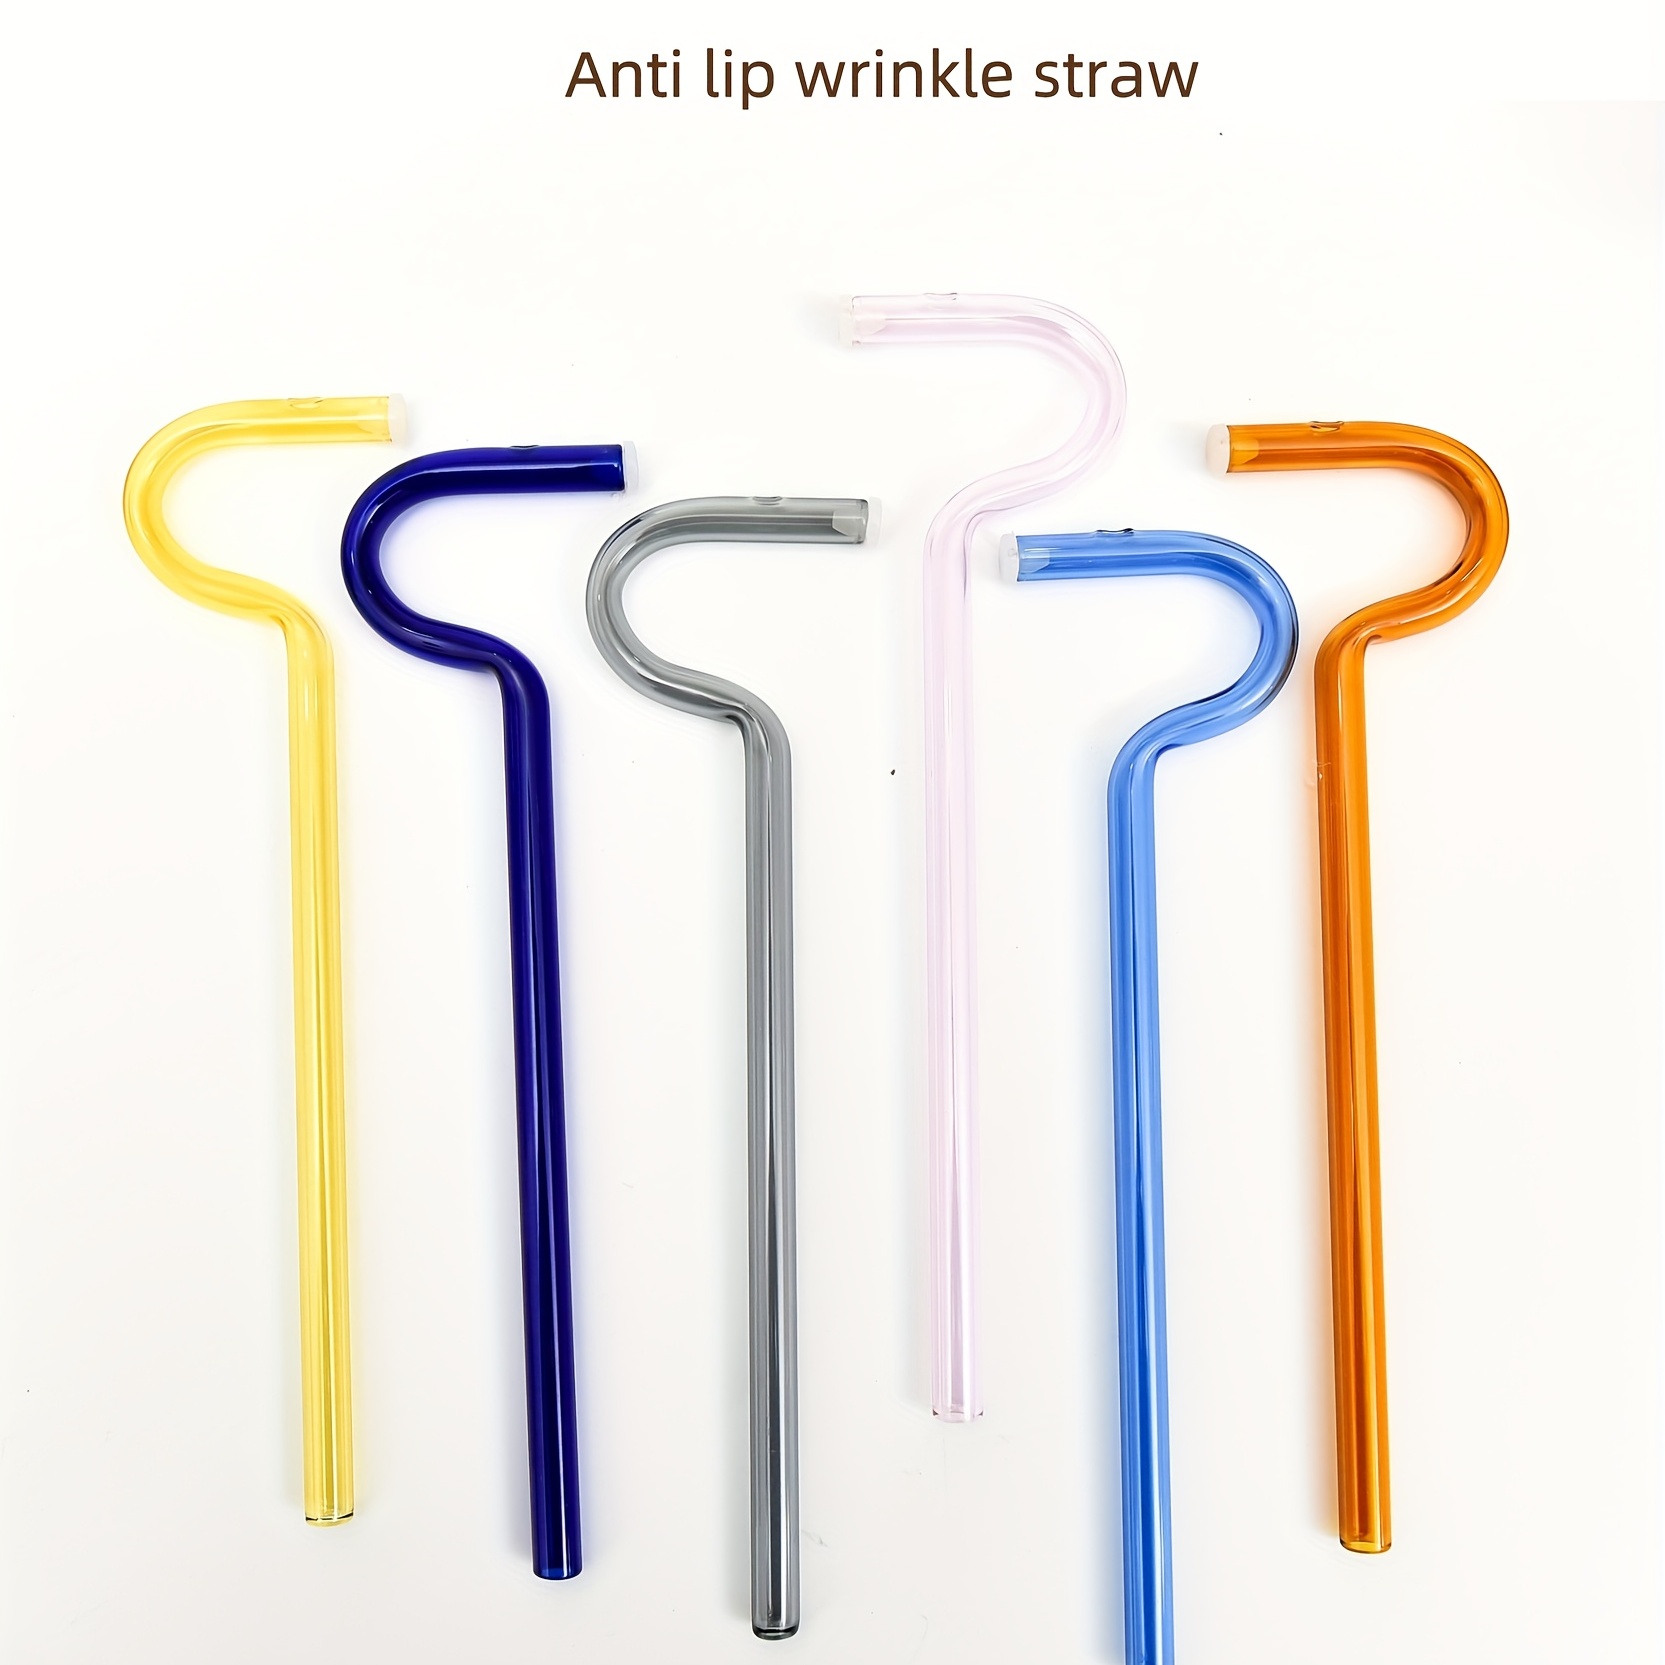 Anti Wrinkle Straw 2pcs Reusable Glass Straw For Cup Anti Wrinkle